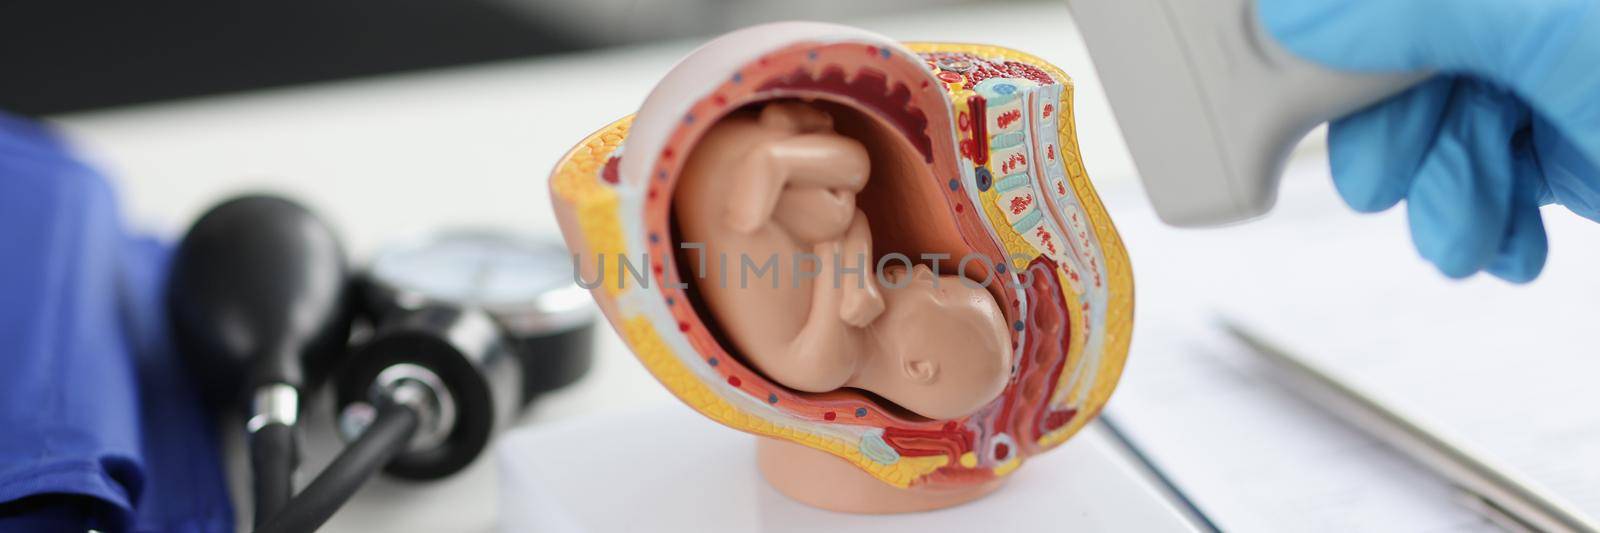 Doctor holding transducer for ultrasound examination in front of artificial model of human fetus in uterus closeup by kuprevich